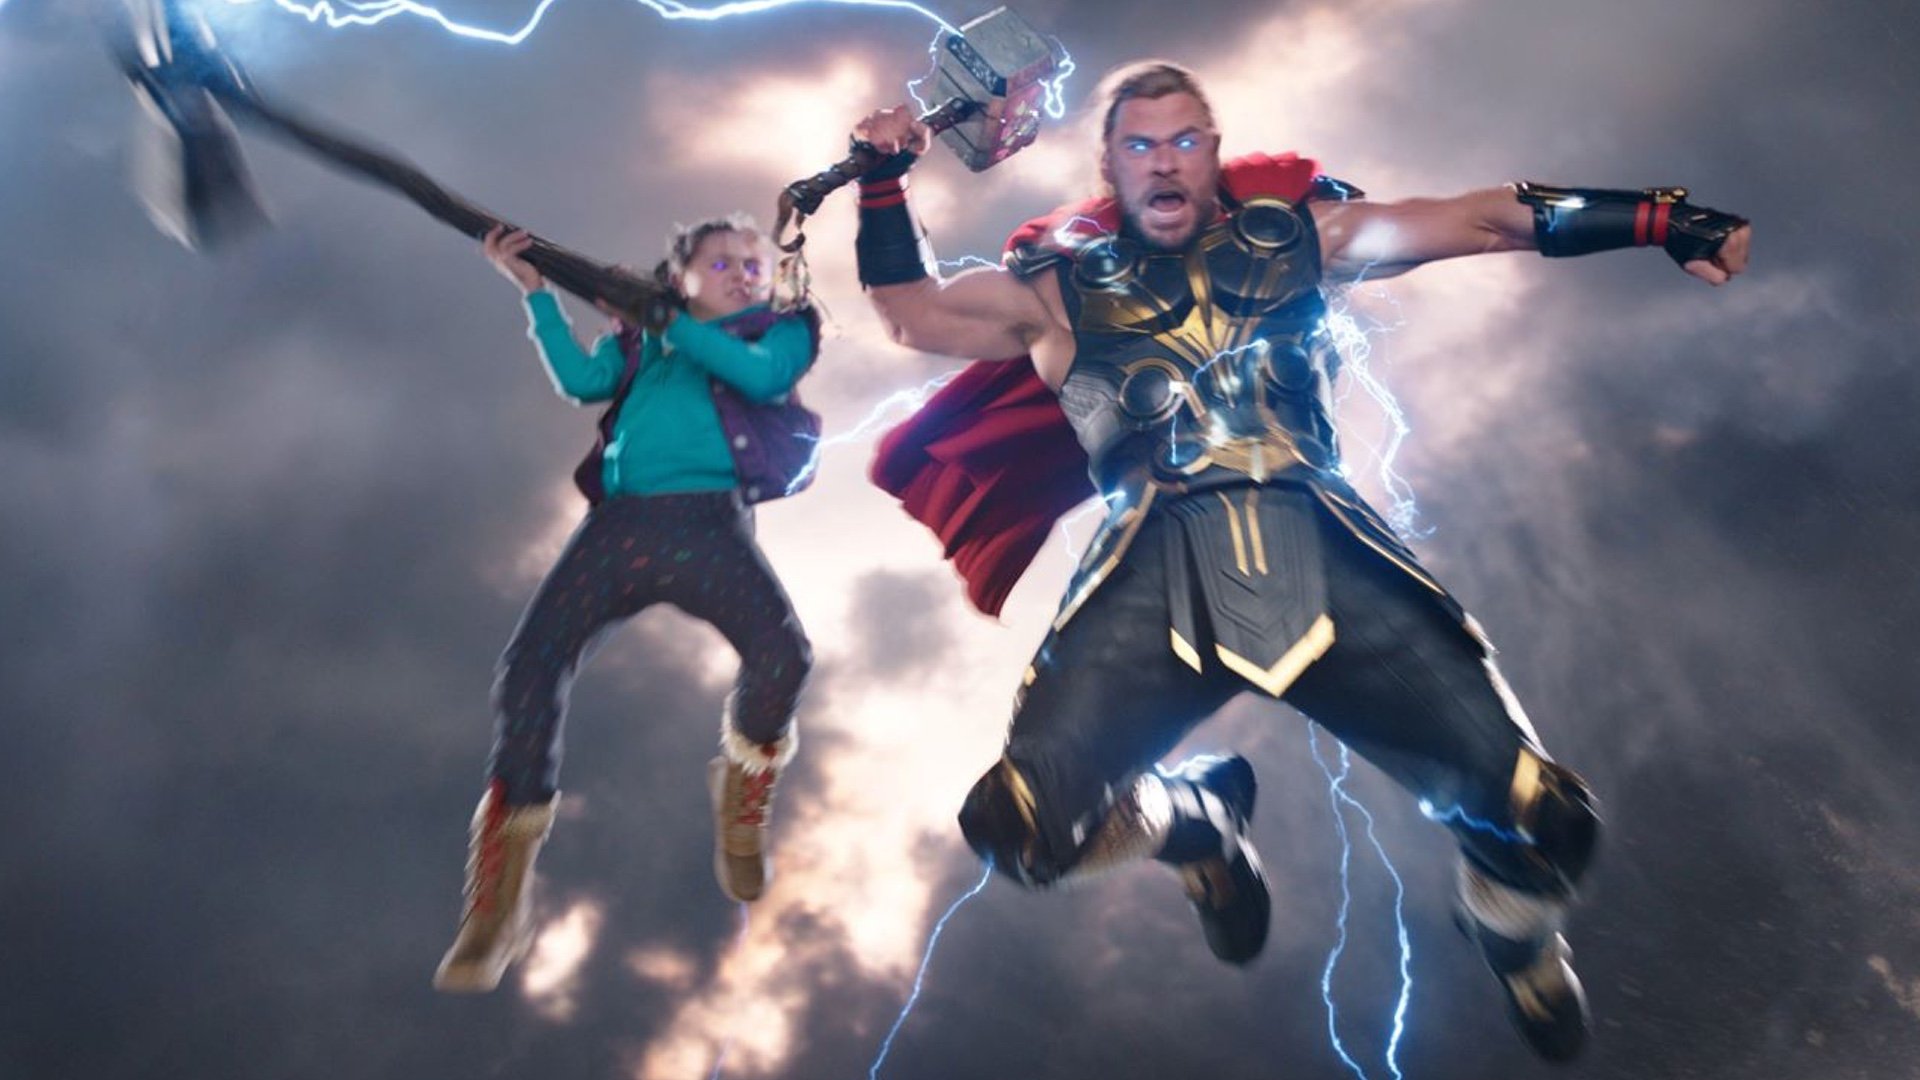 Thor: Love and Thunder Cast & Character Guide: Who's Who in the